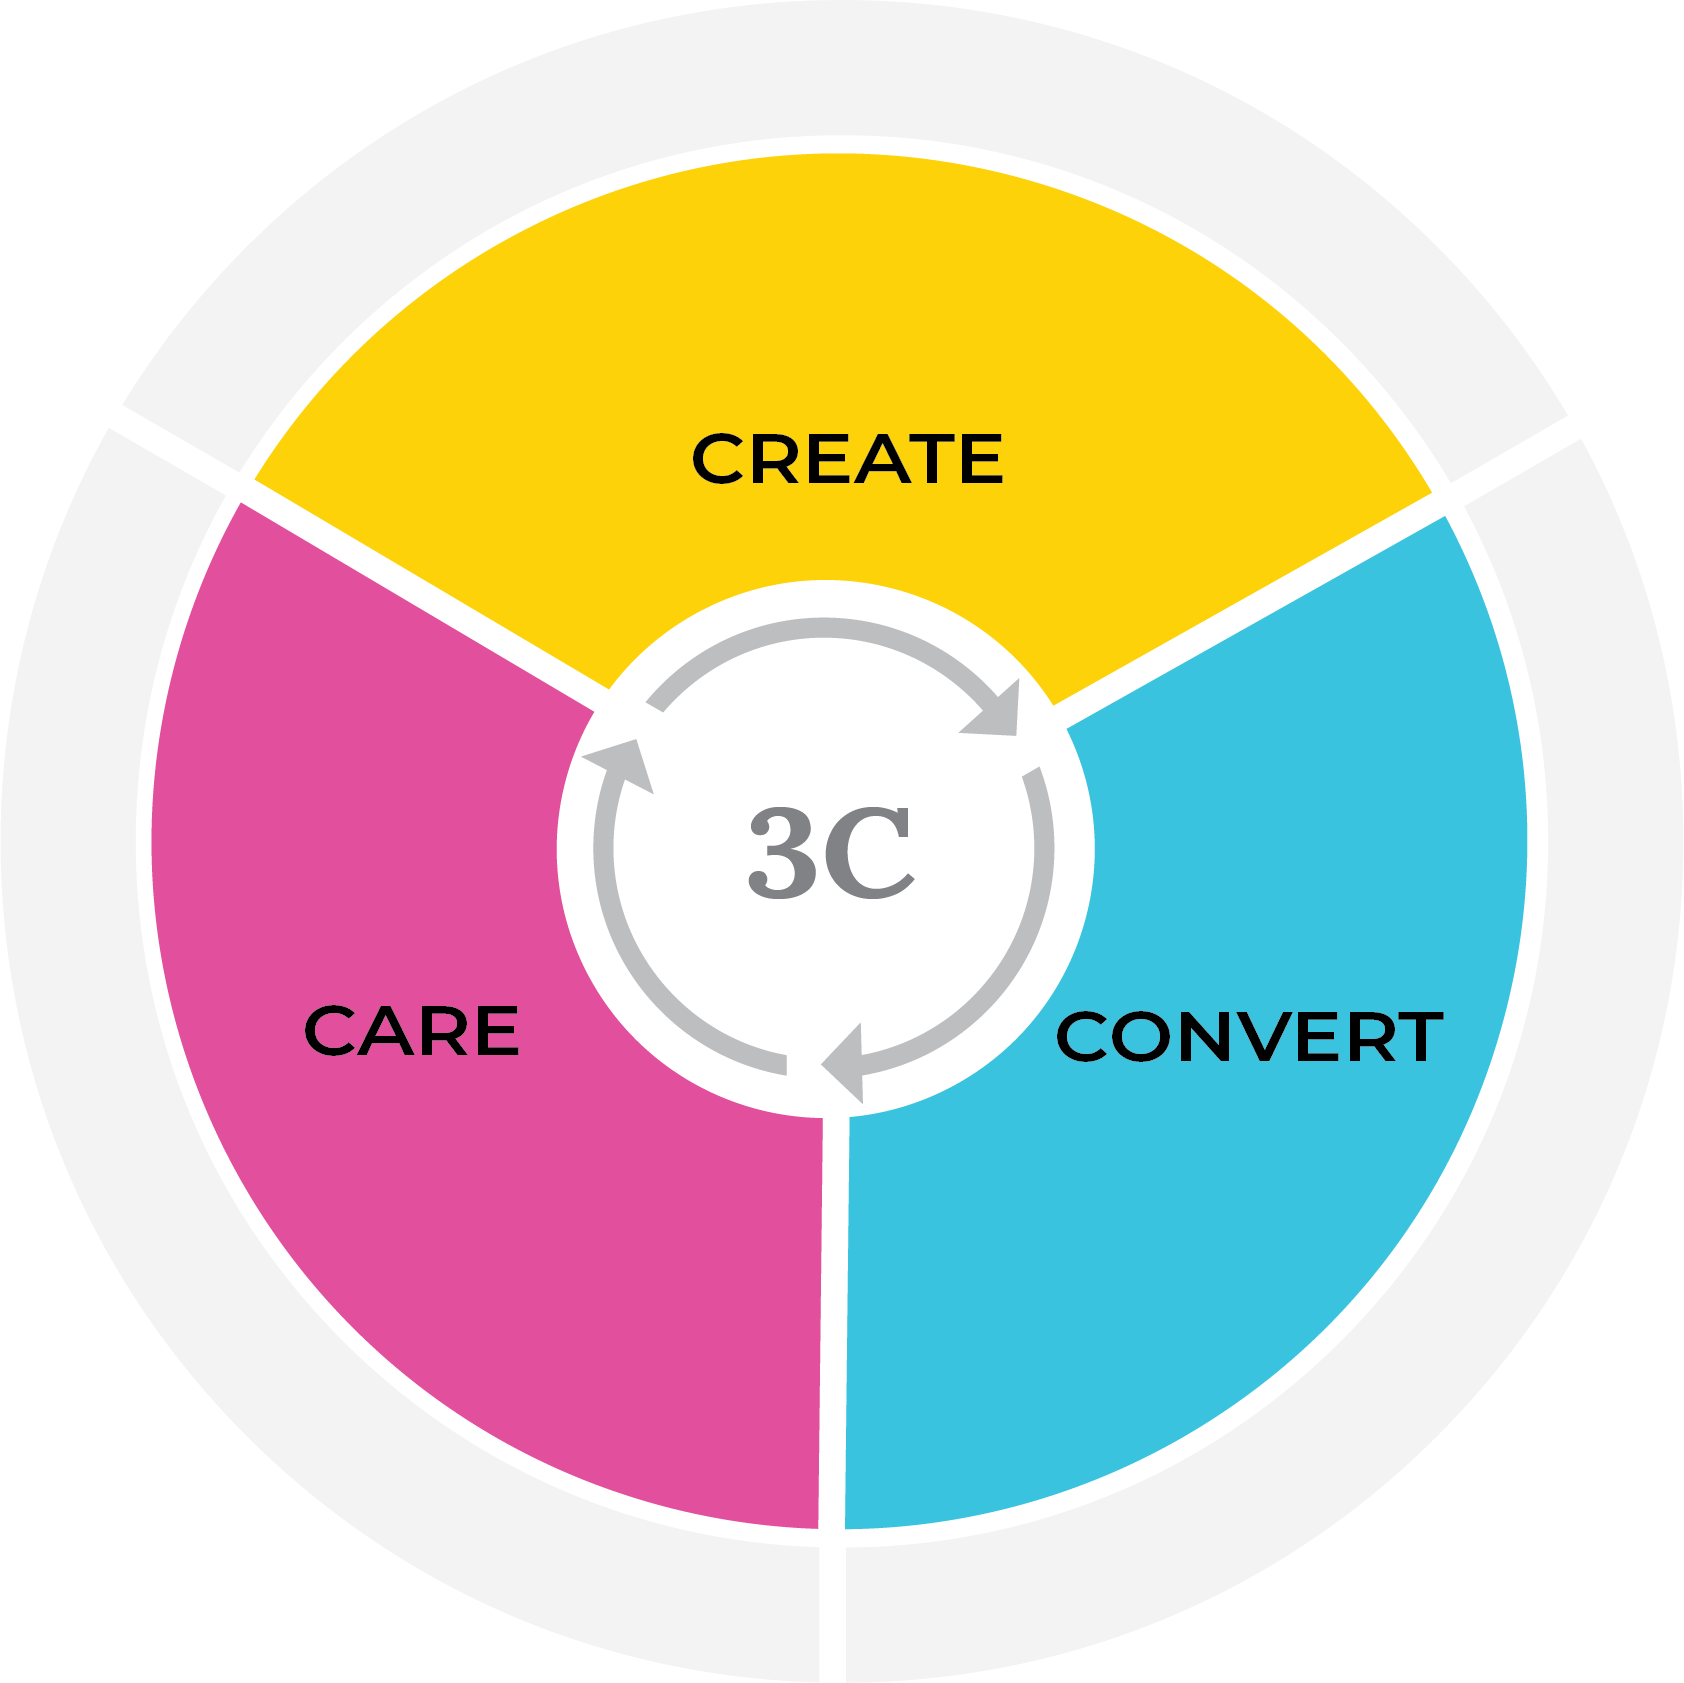 What are the 3 C's of Digital Marketing?